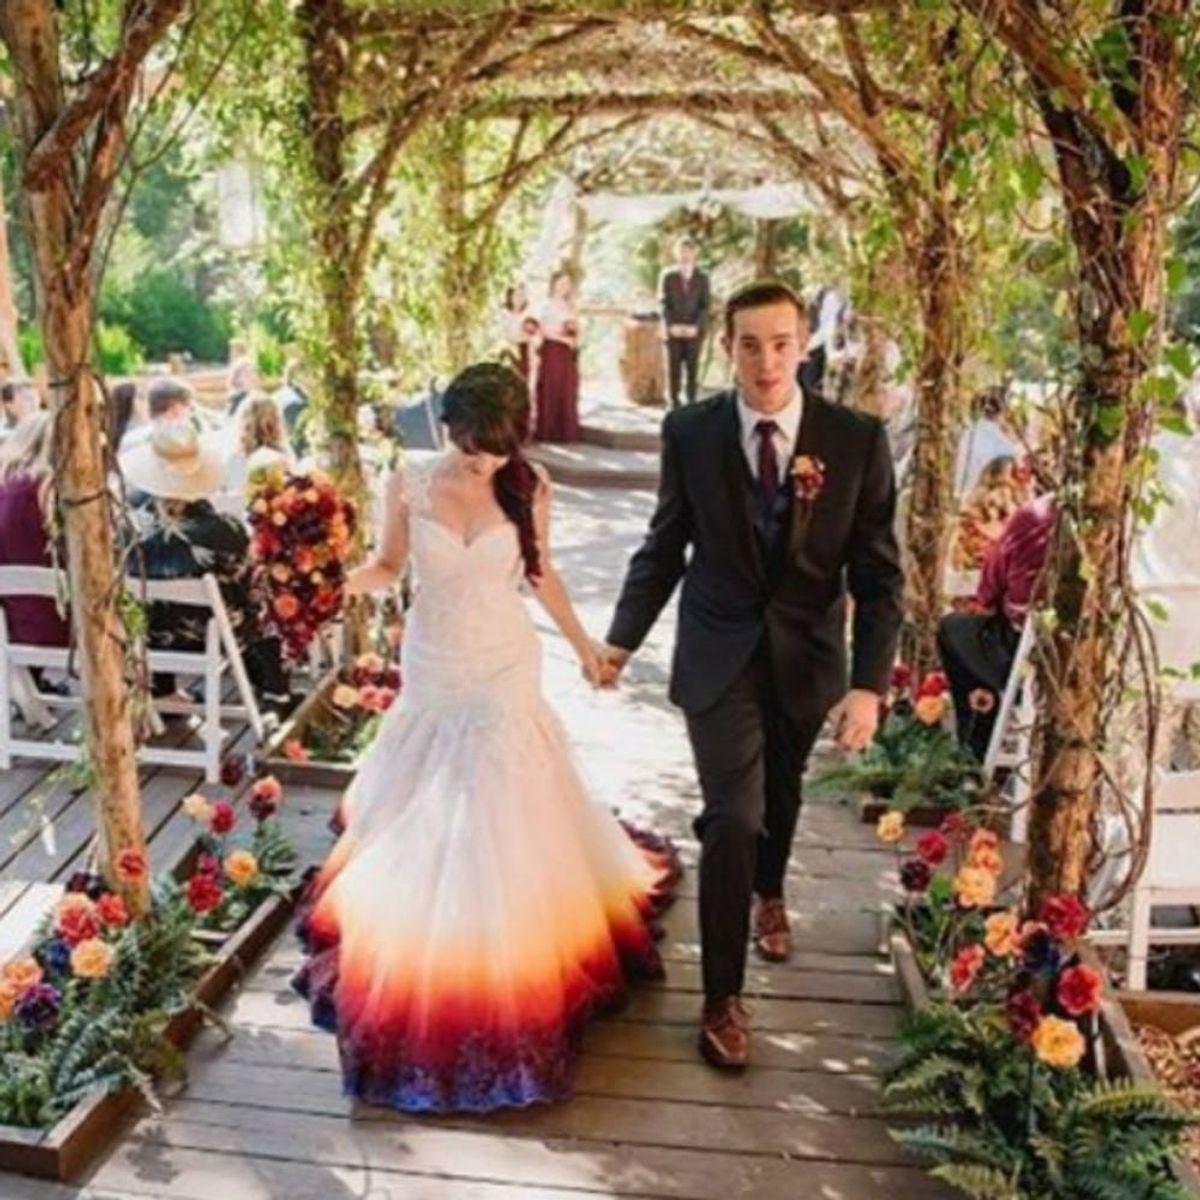 You NEED to See This Bride’s Gorgeous Airbrushed Wedding Dress Creation